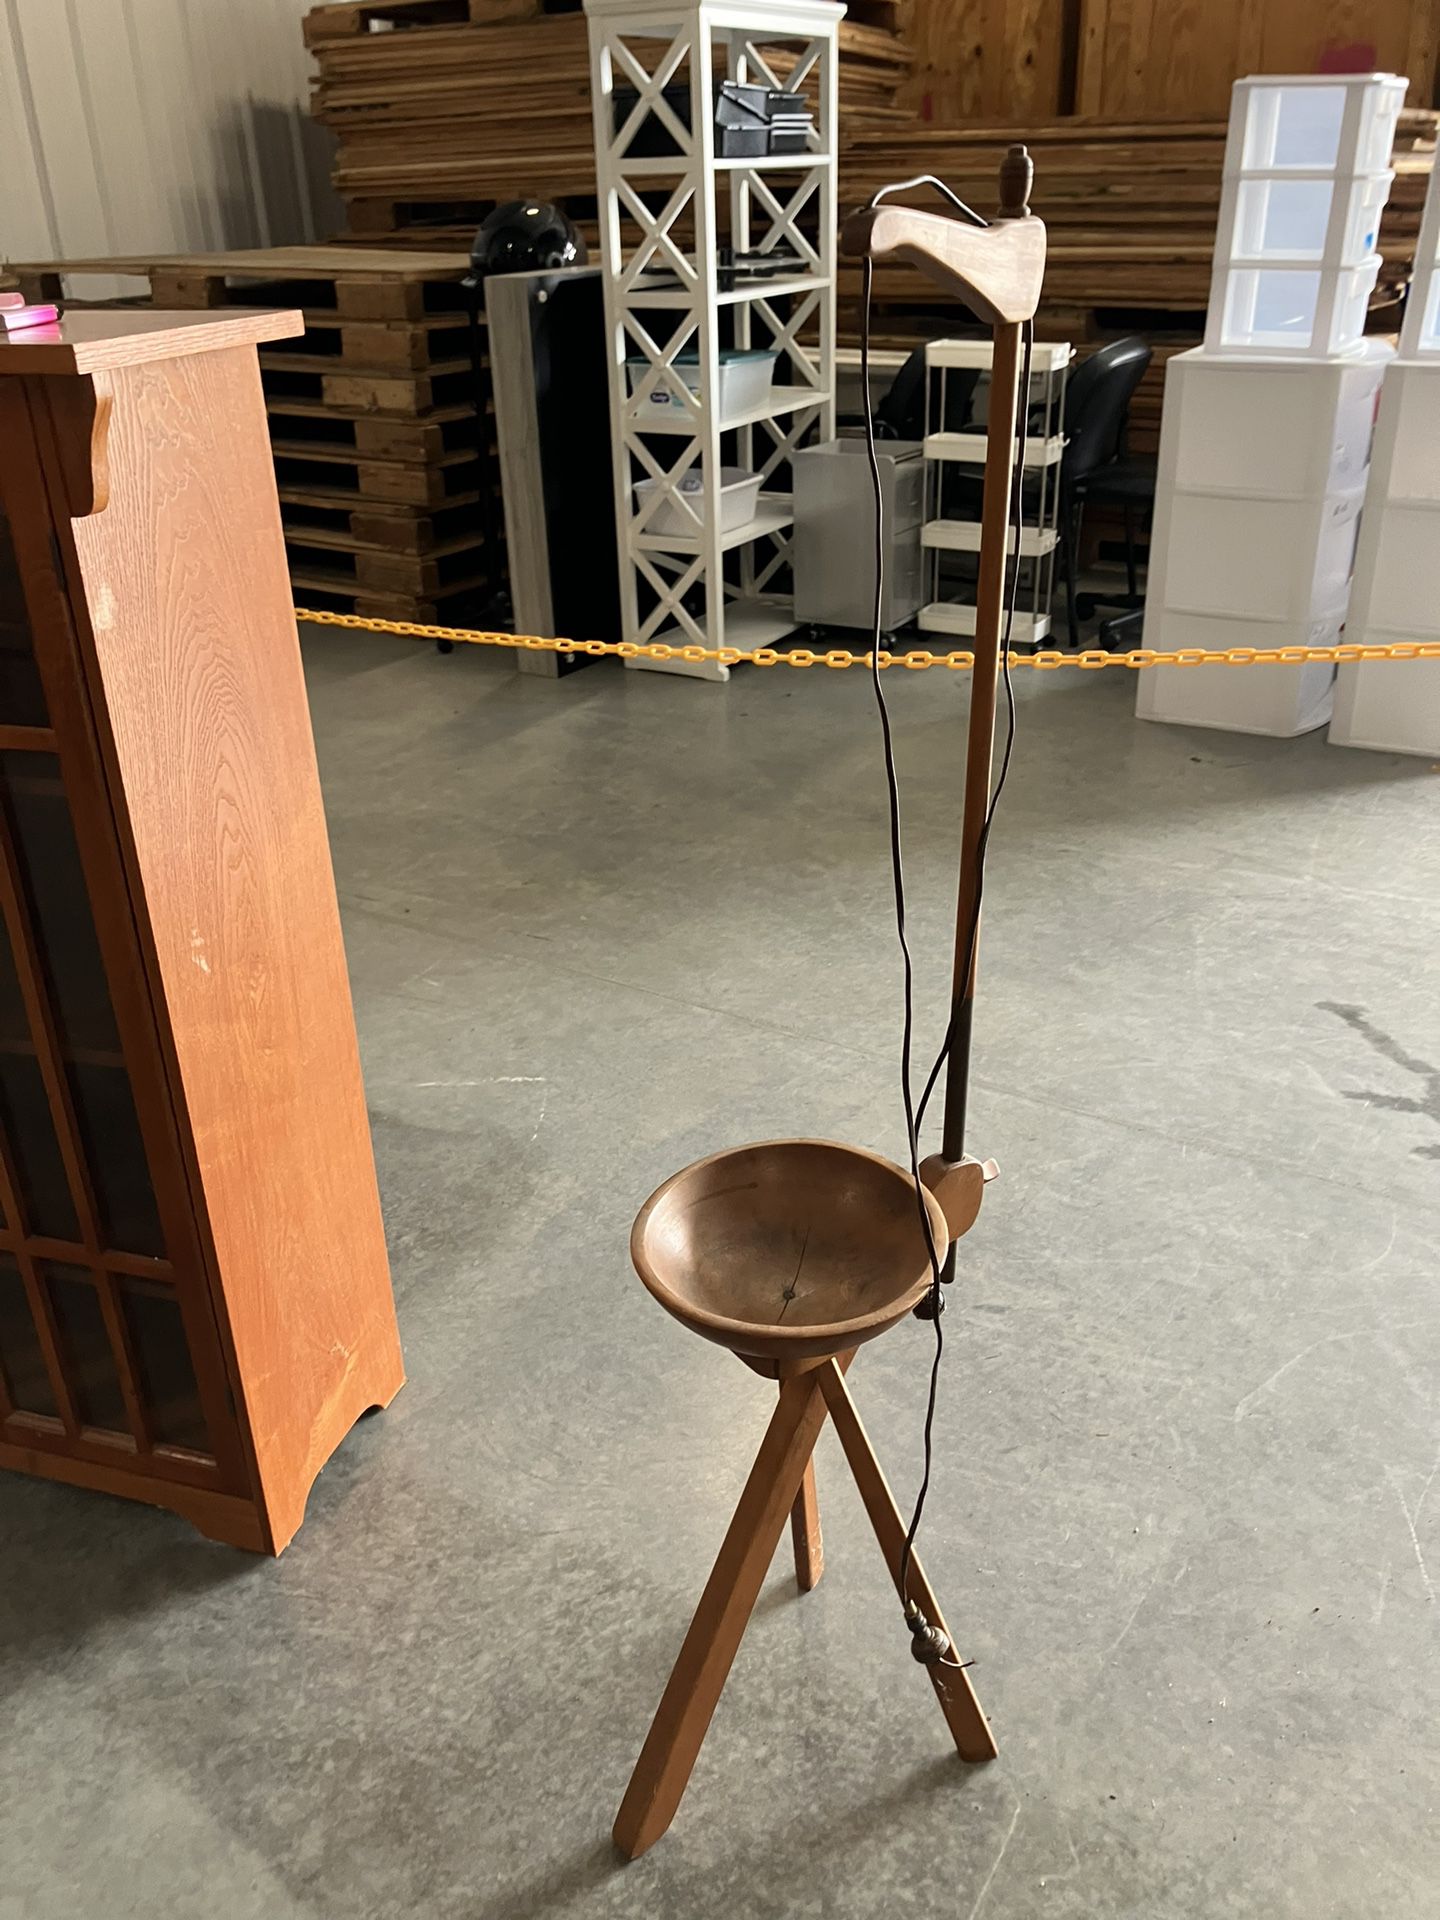 vintage “ cane chair” turned lamp